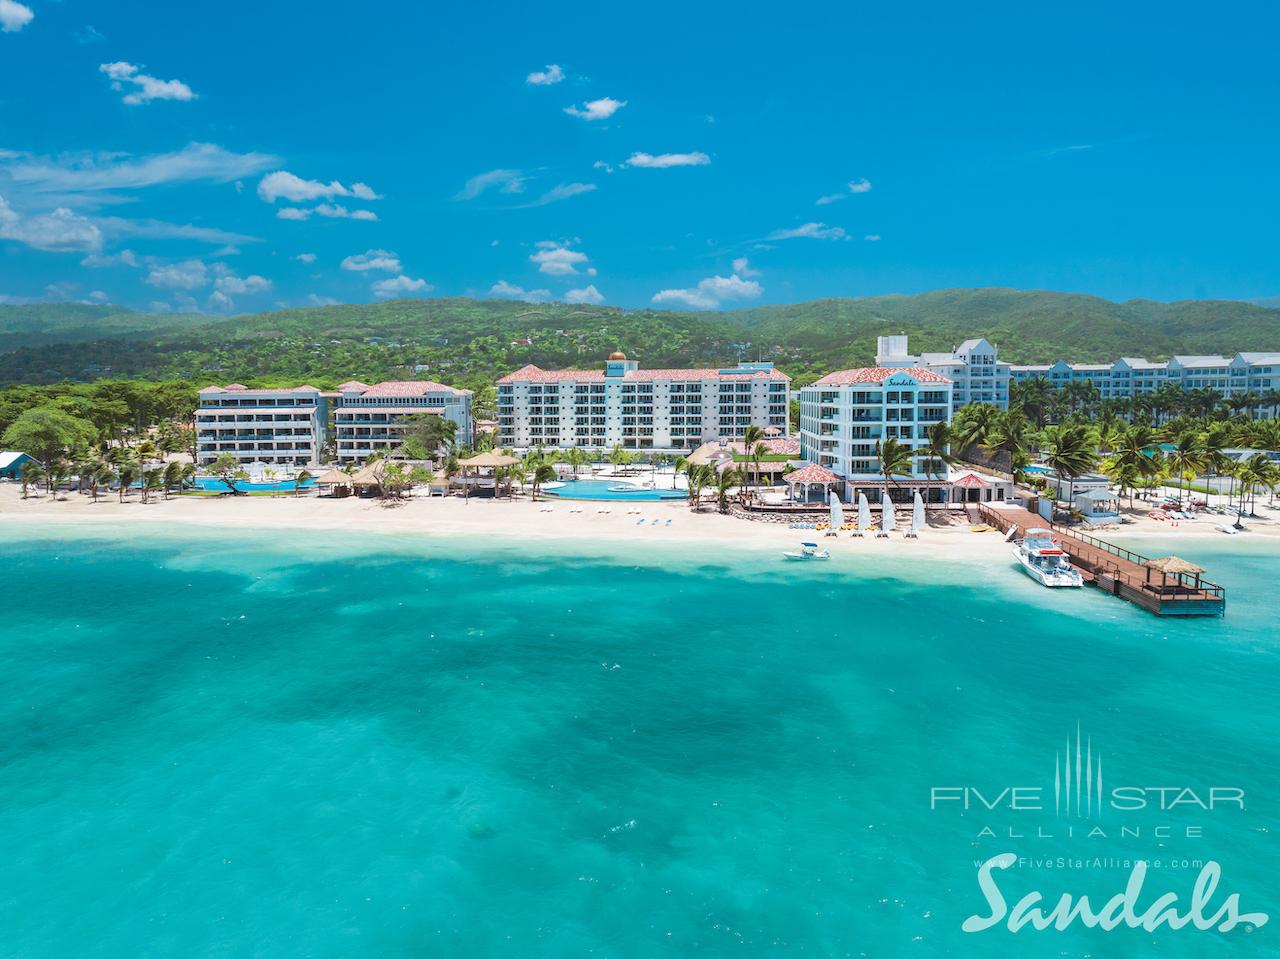 Sandals Dunn's River formerly The Jewel Beach Resort